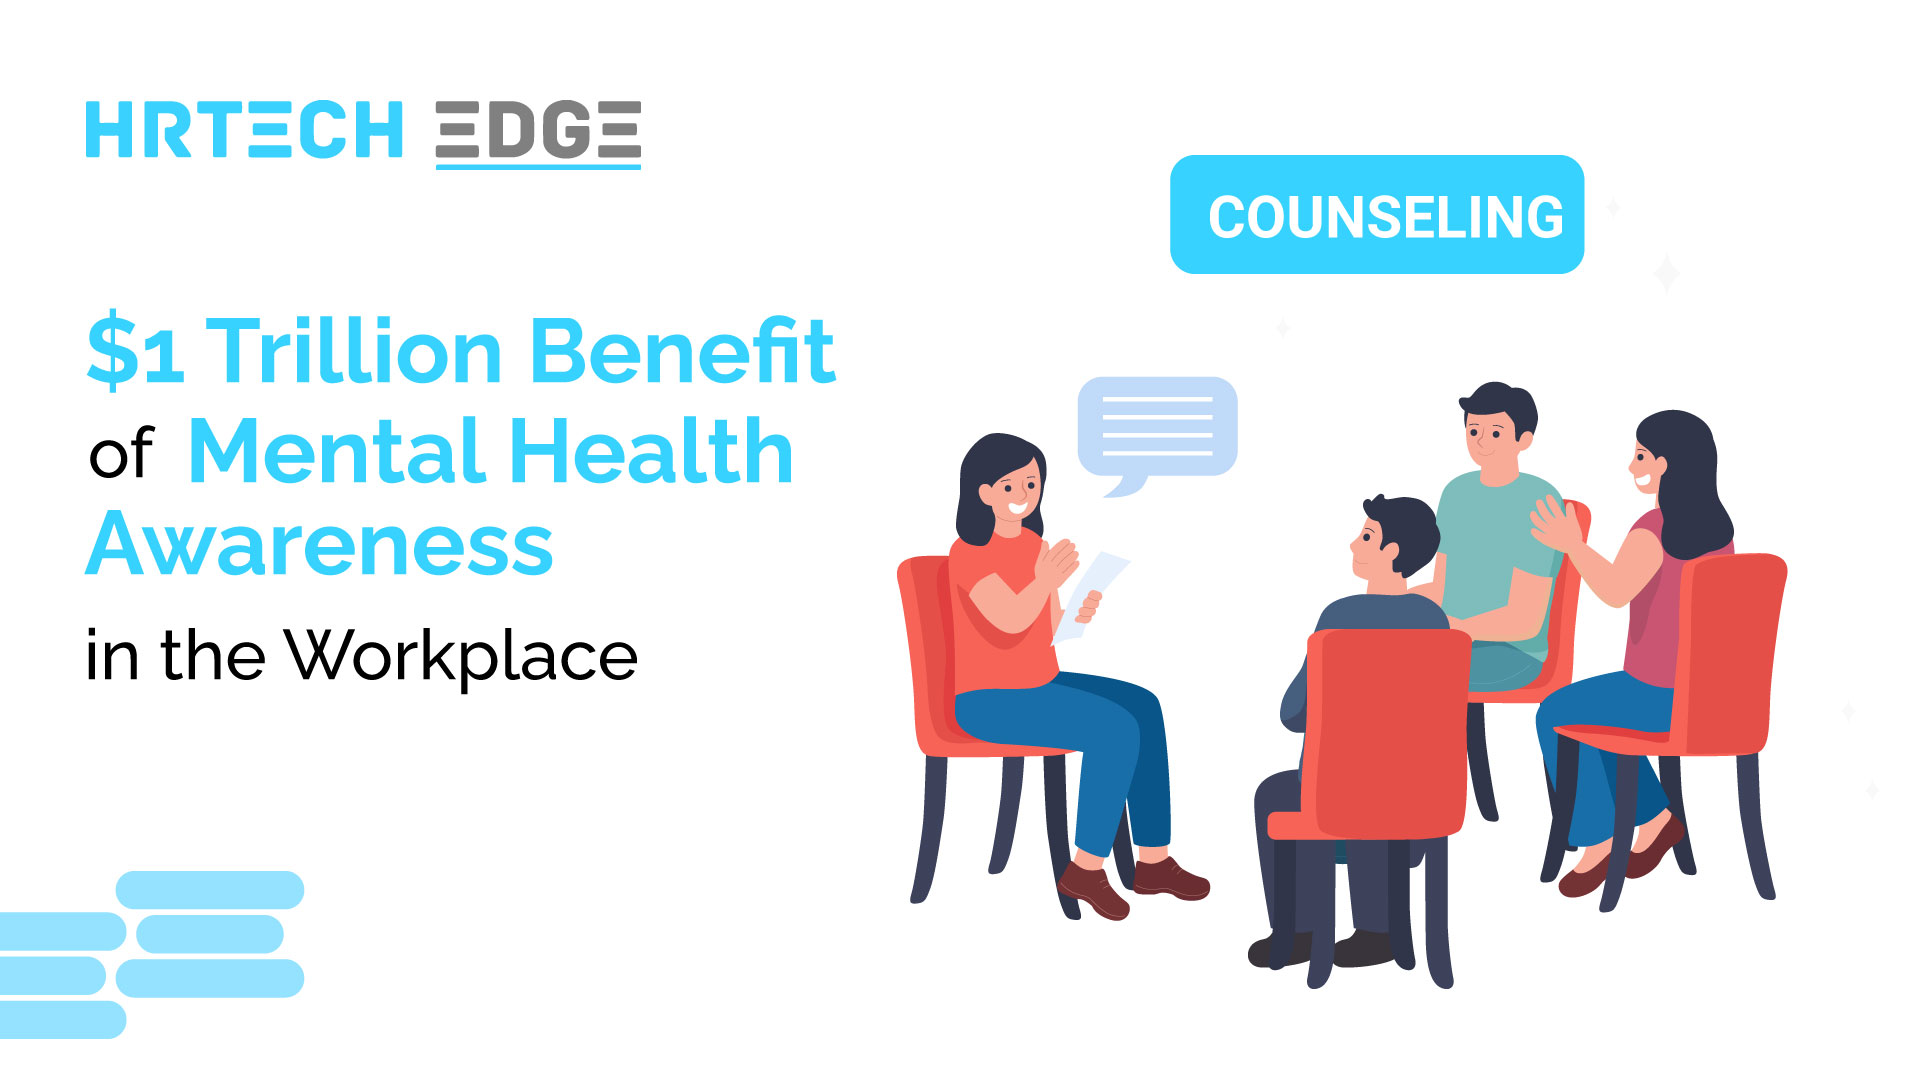 Benefits of mental health awareness in the workplace